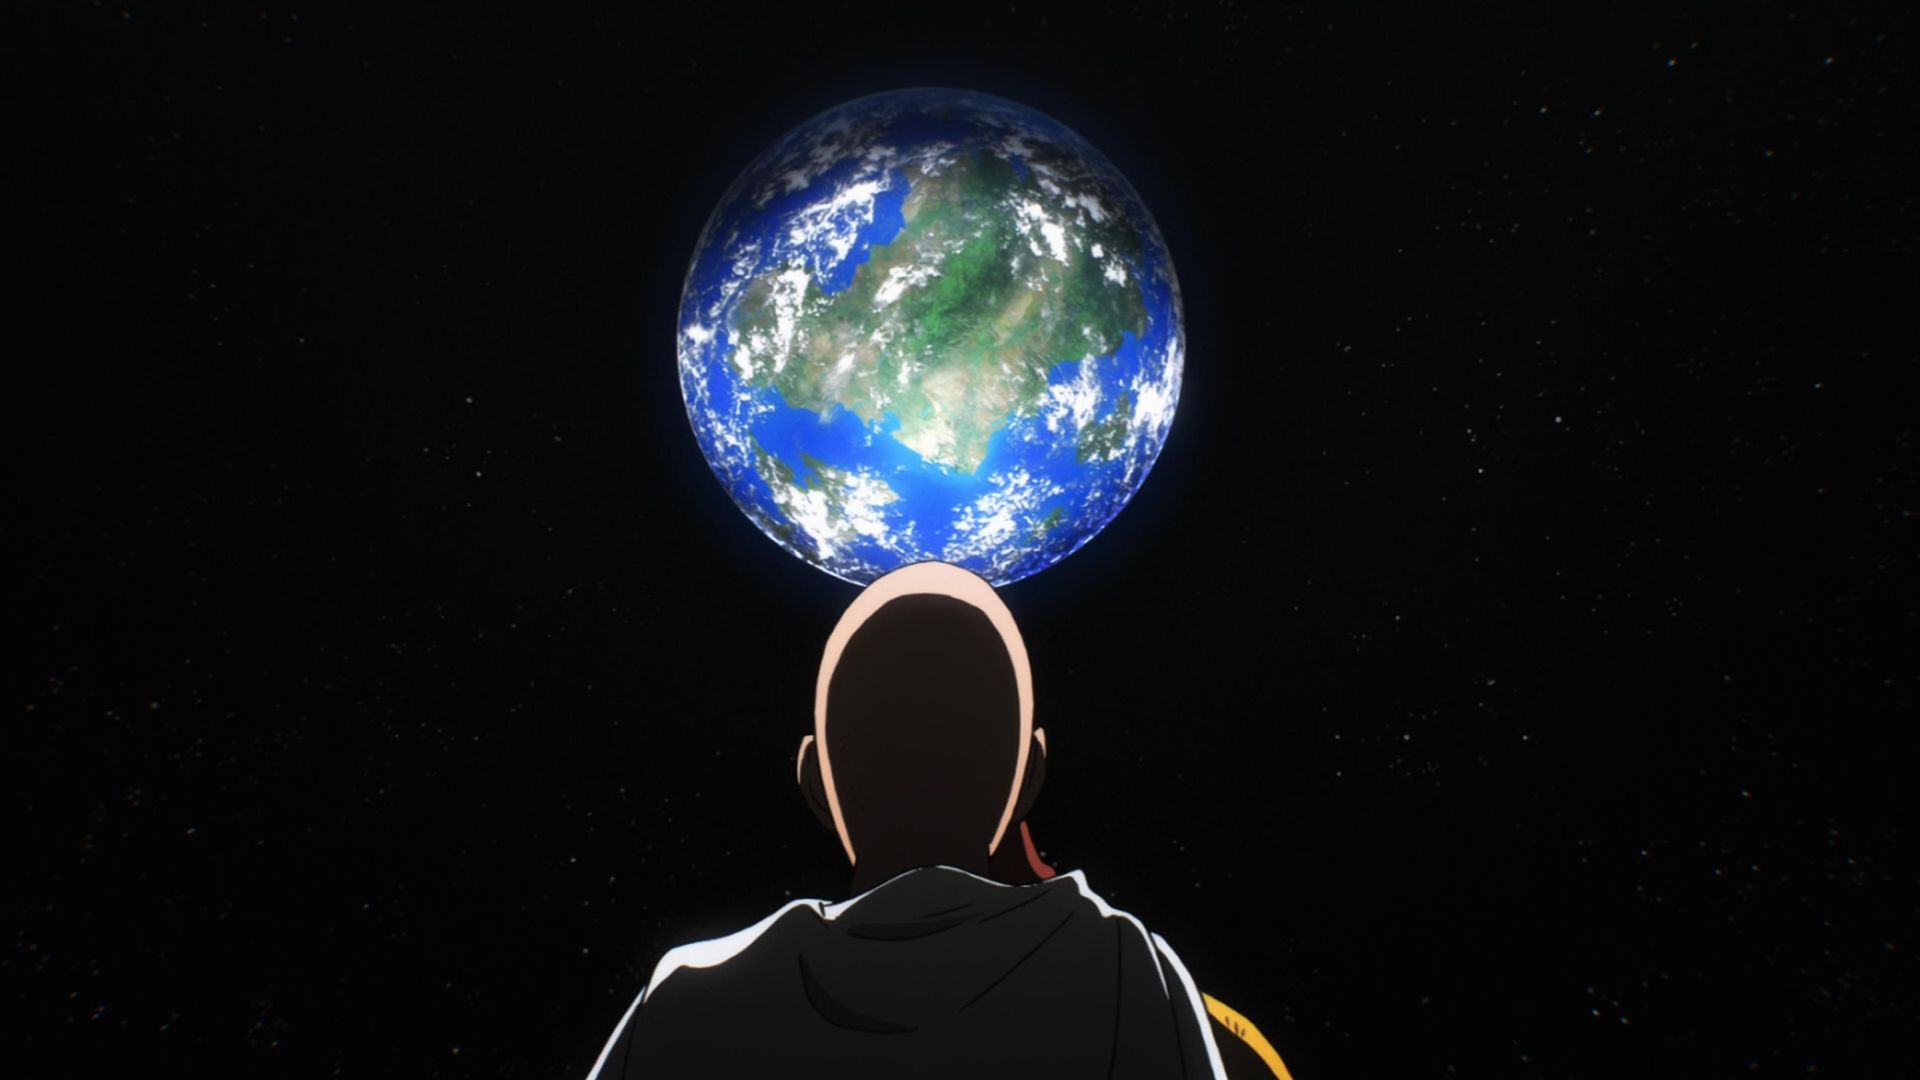 One Punch Man background